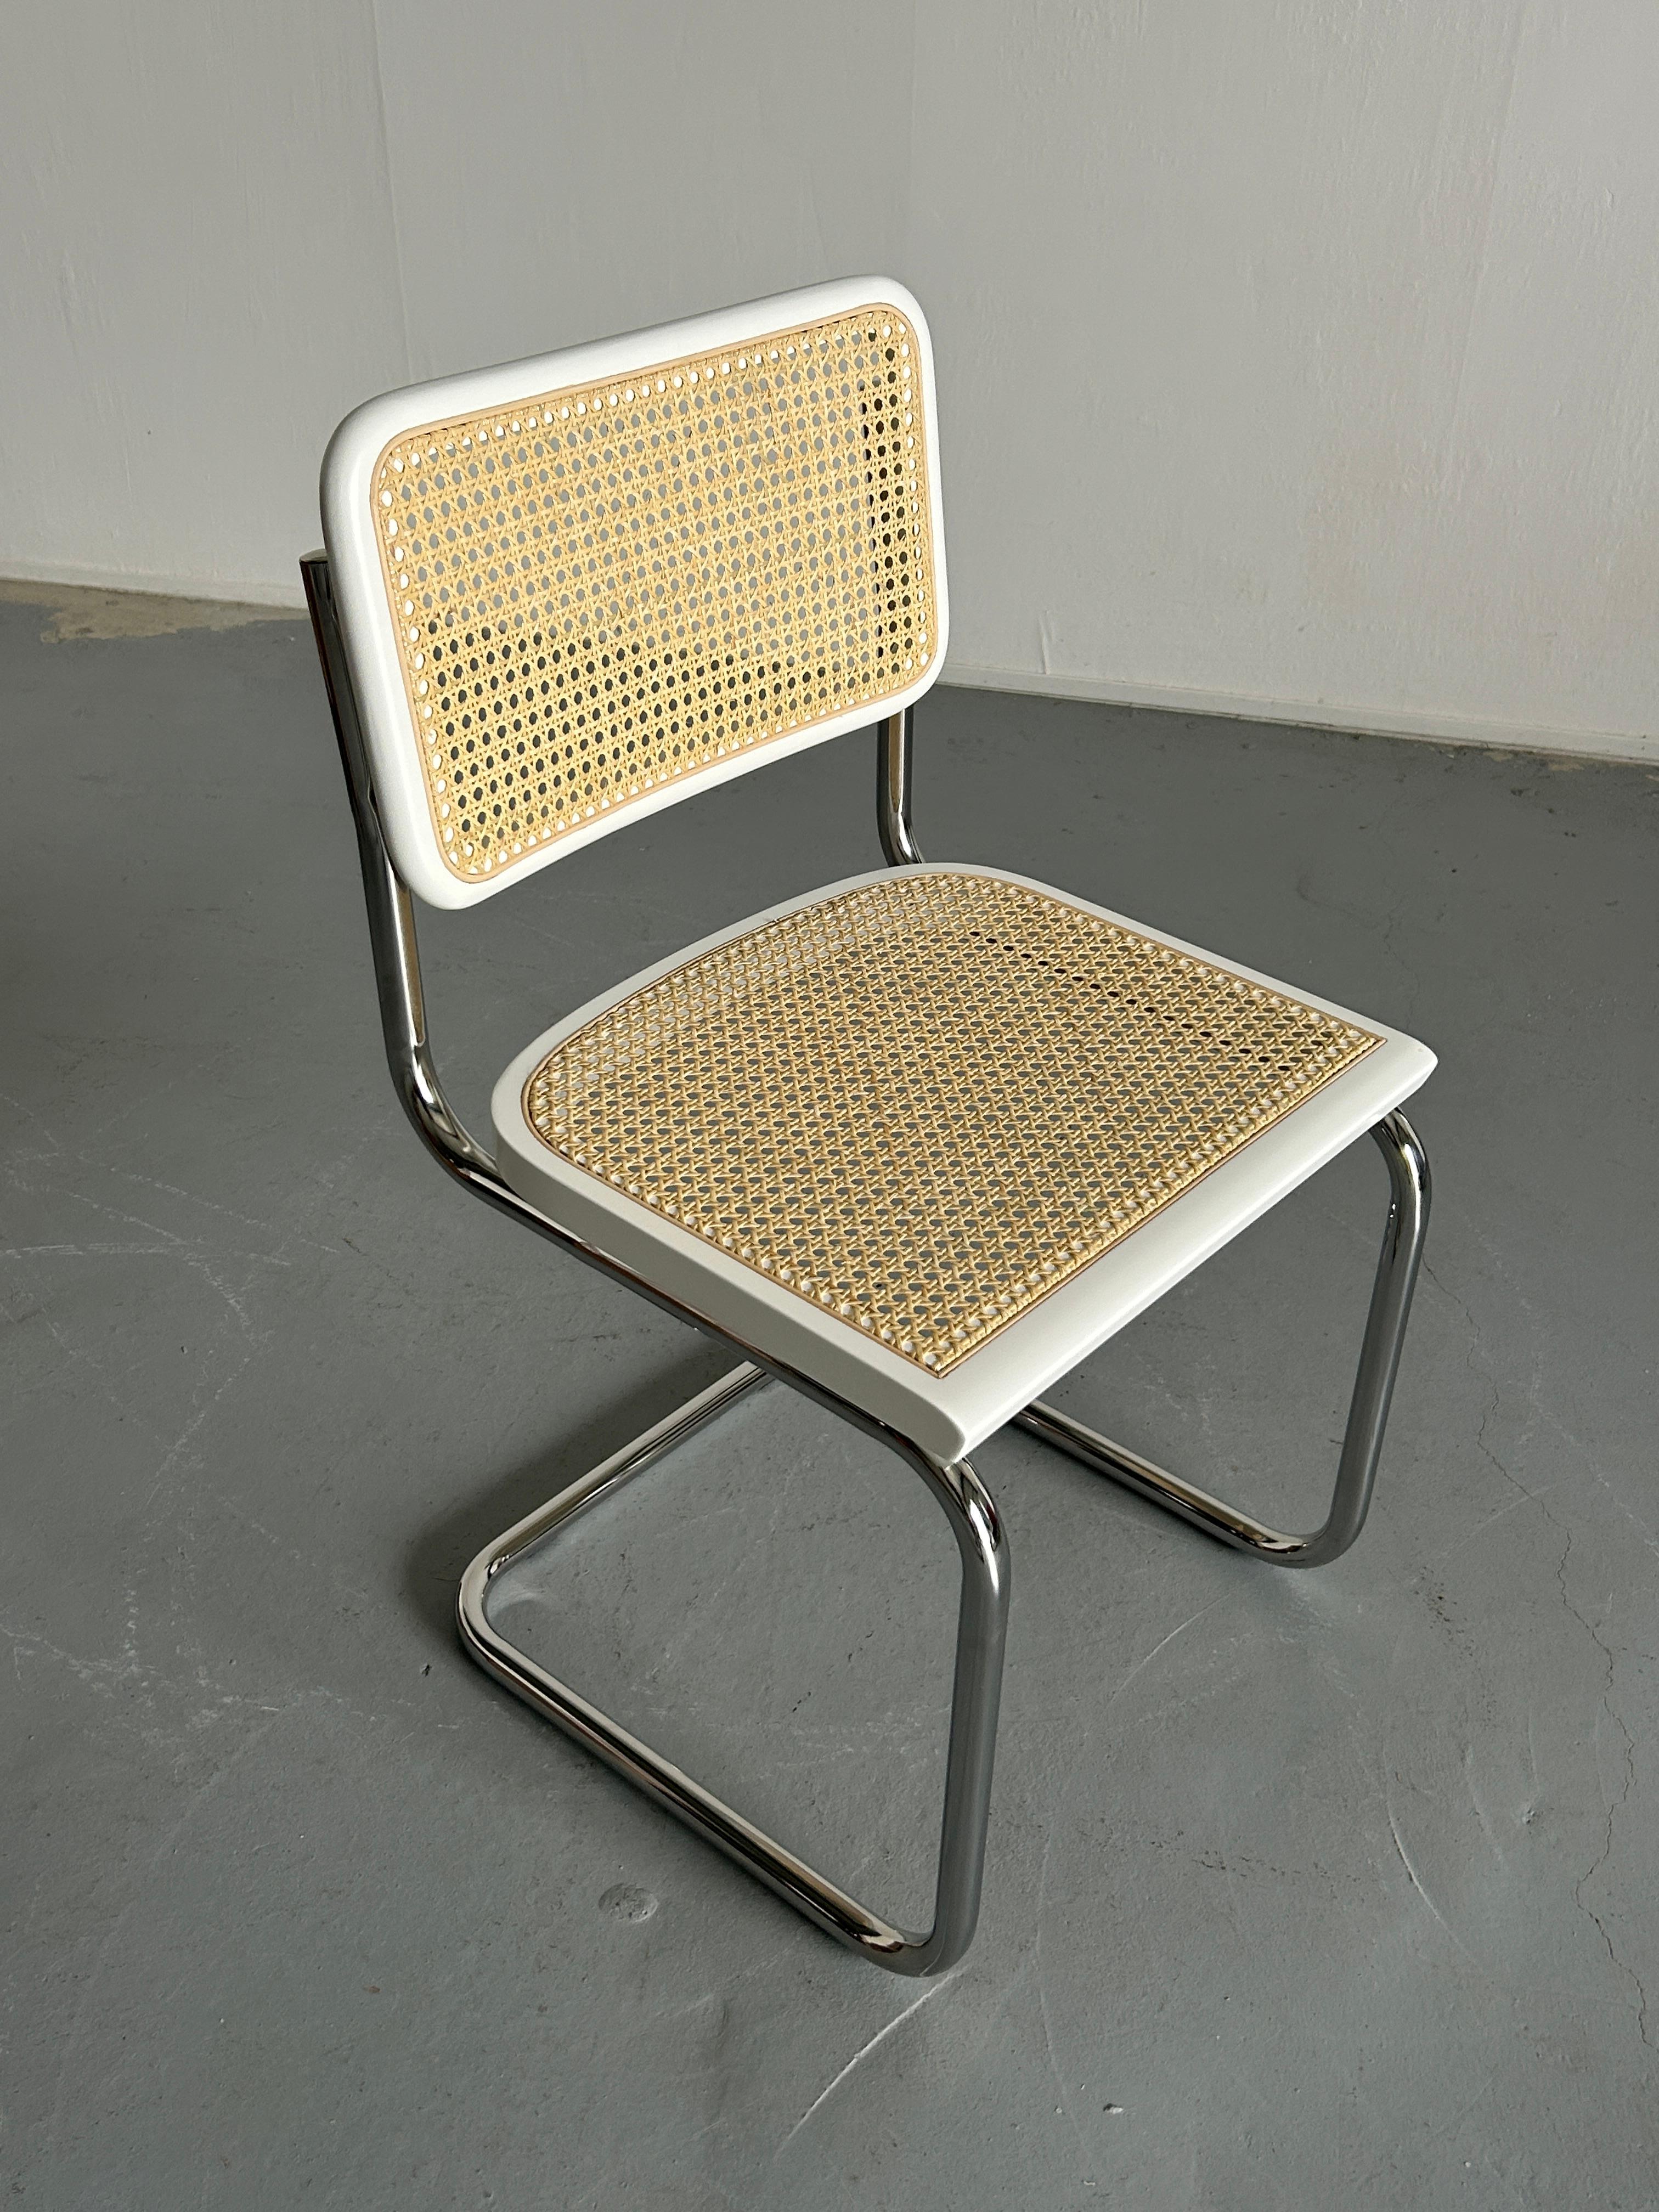 1 of 12 Vintage Cesca Mid-Century Cantilever Chair, Marcel Breuer B32 Design In Good Condition For Sale In Zagreb, HR